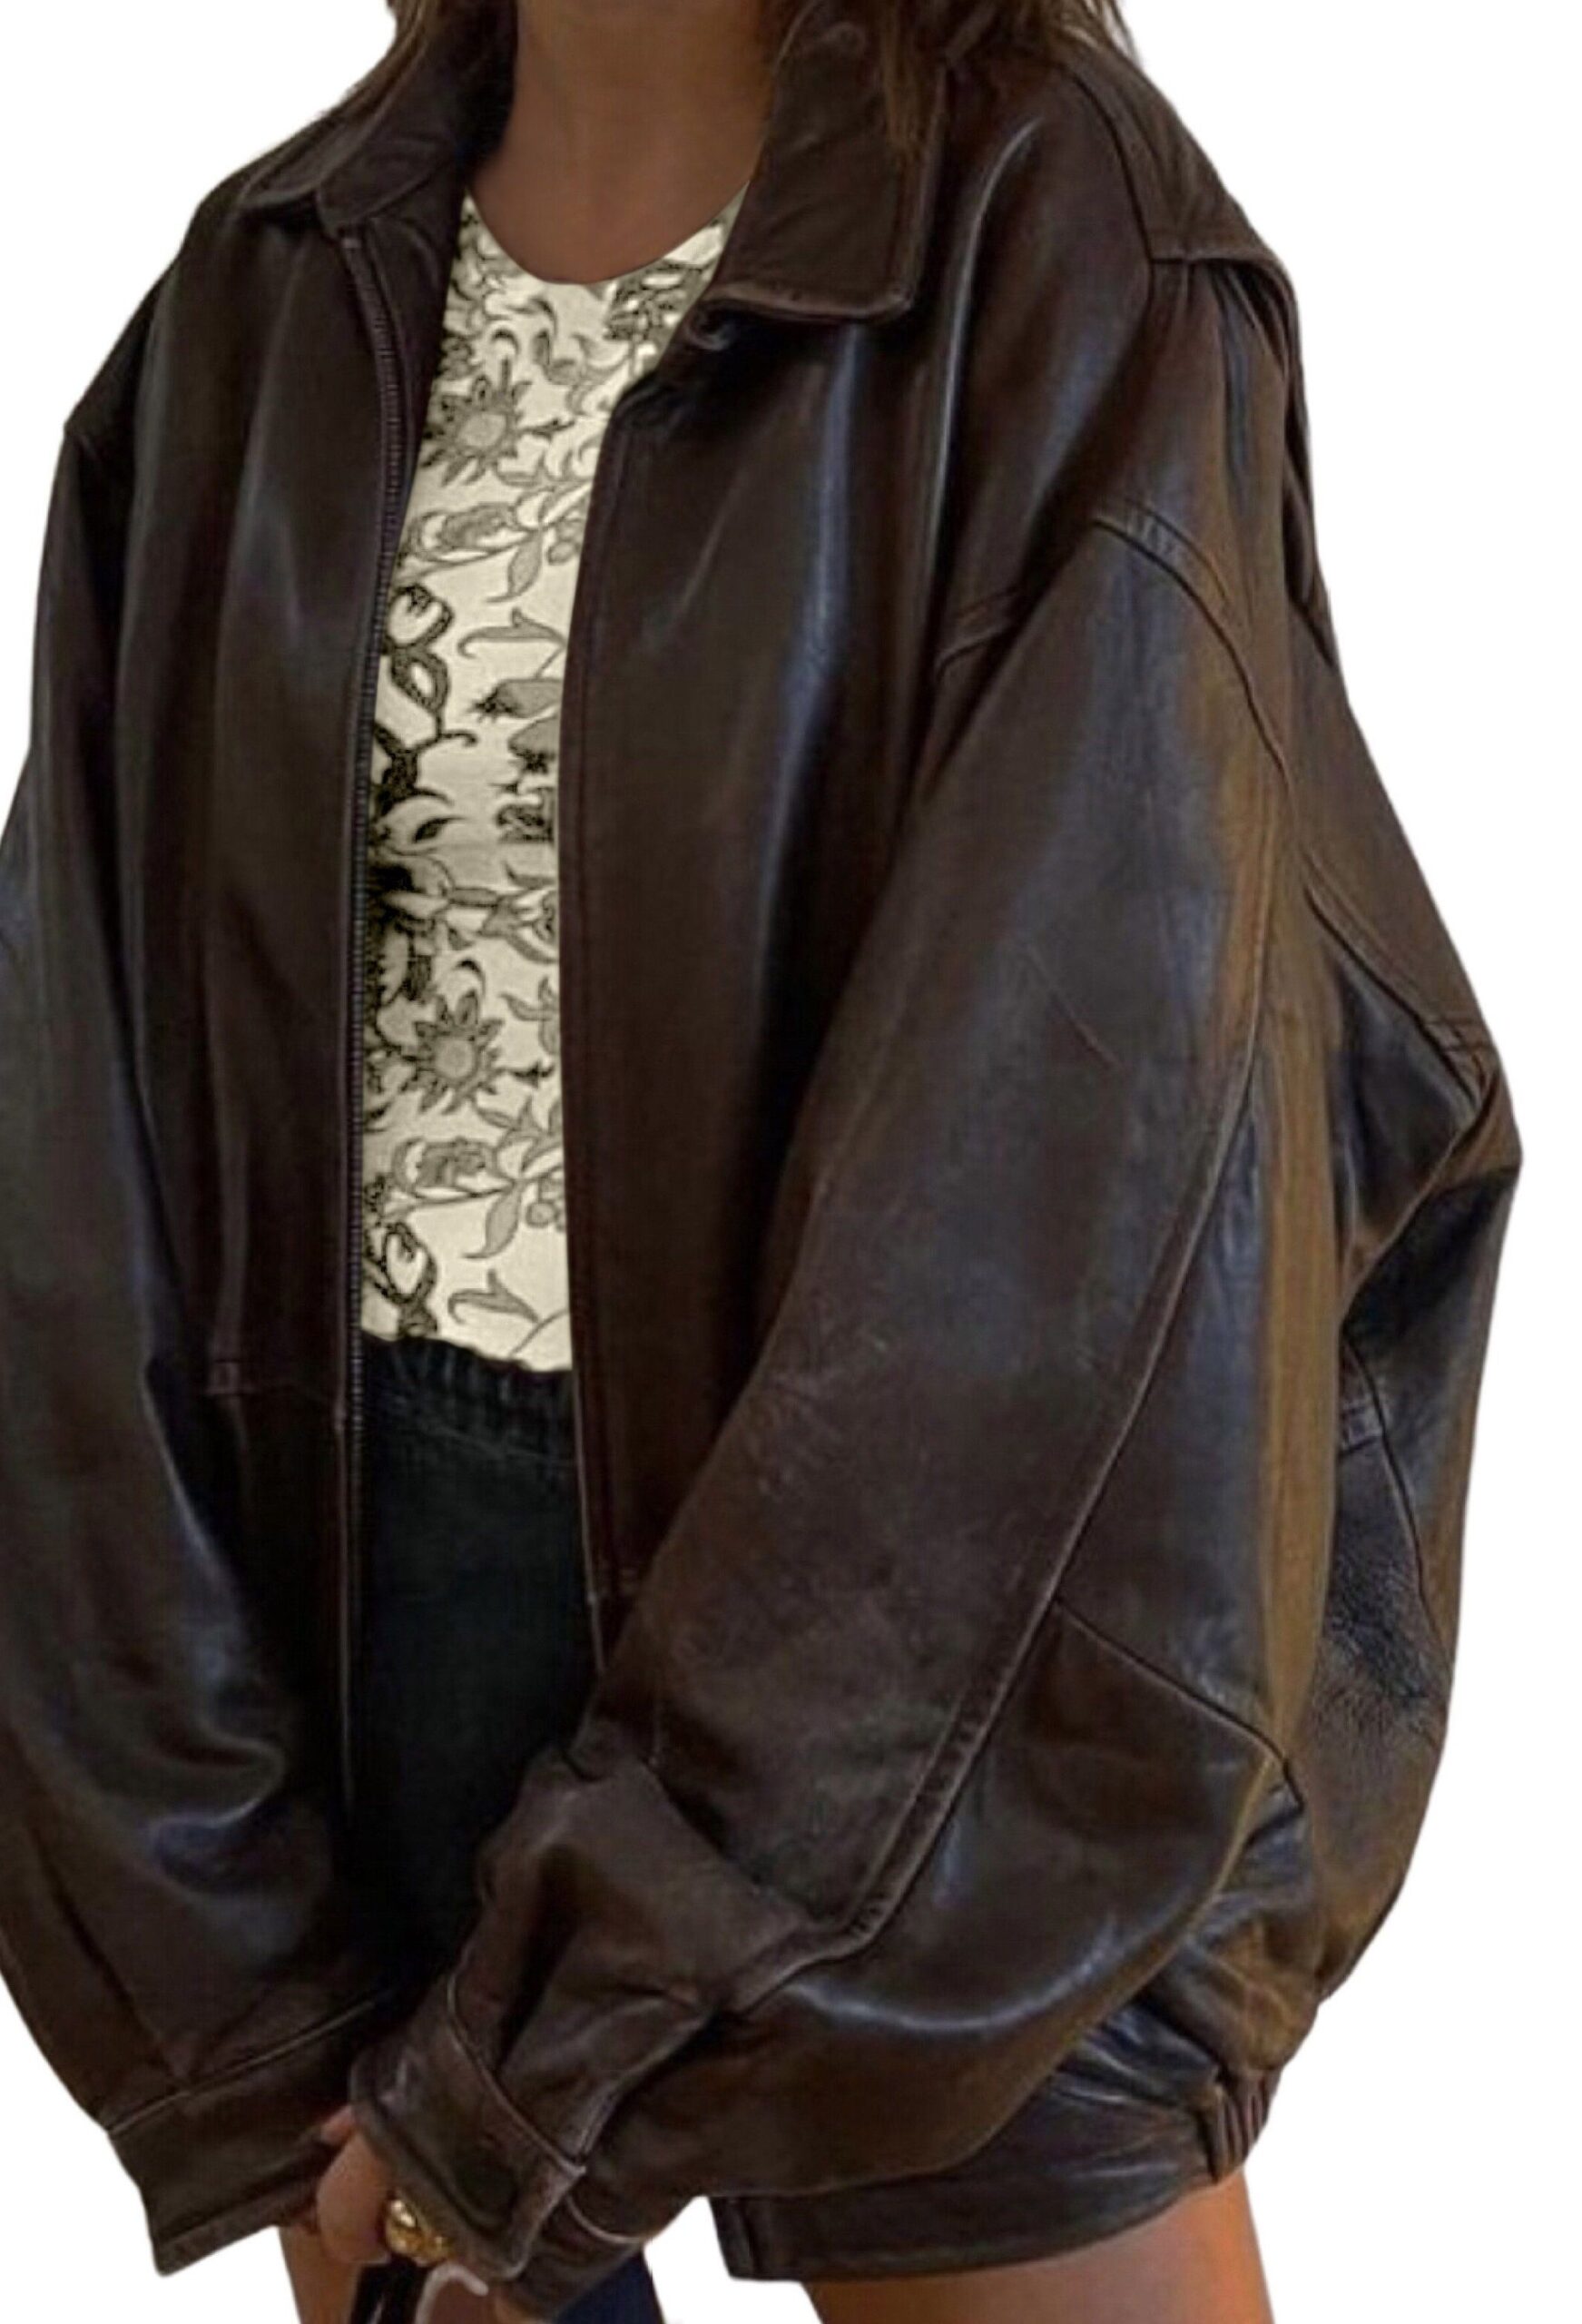 Some great types of leather jacket